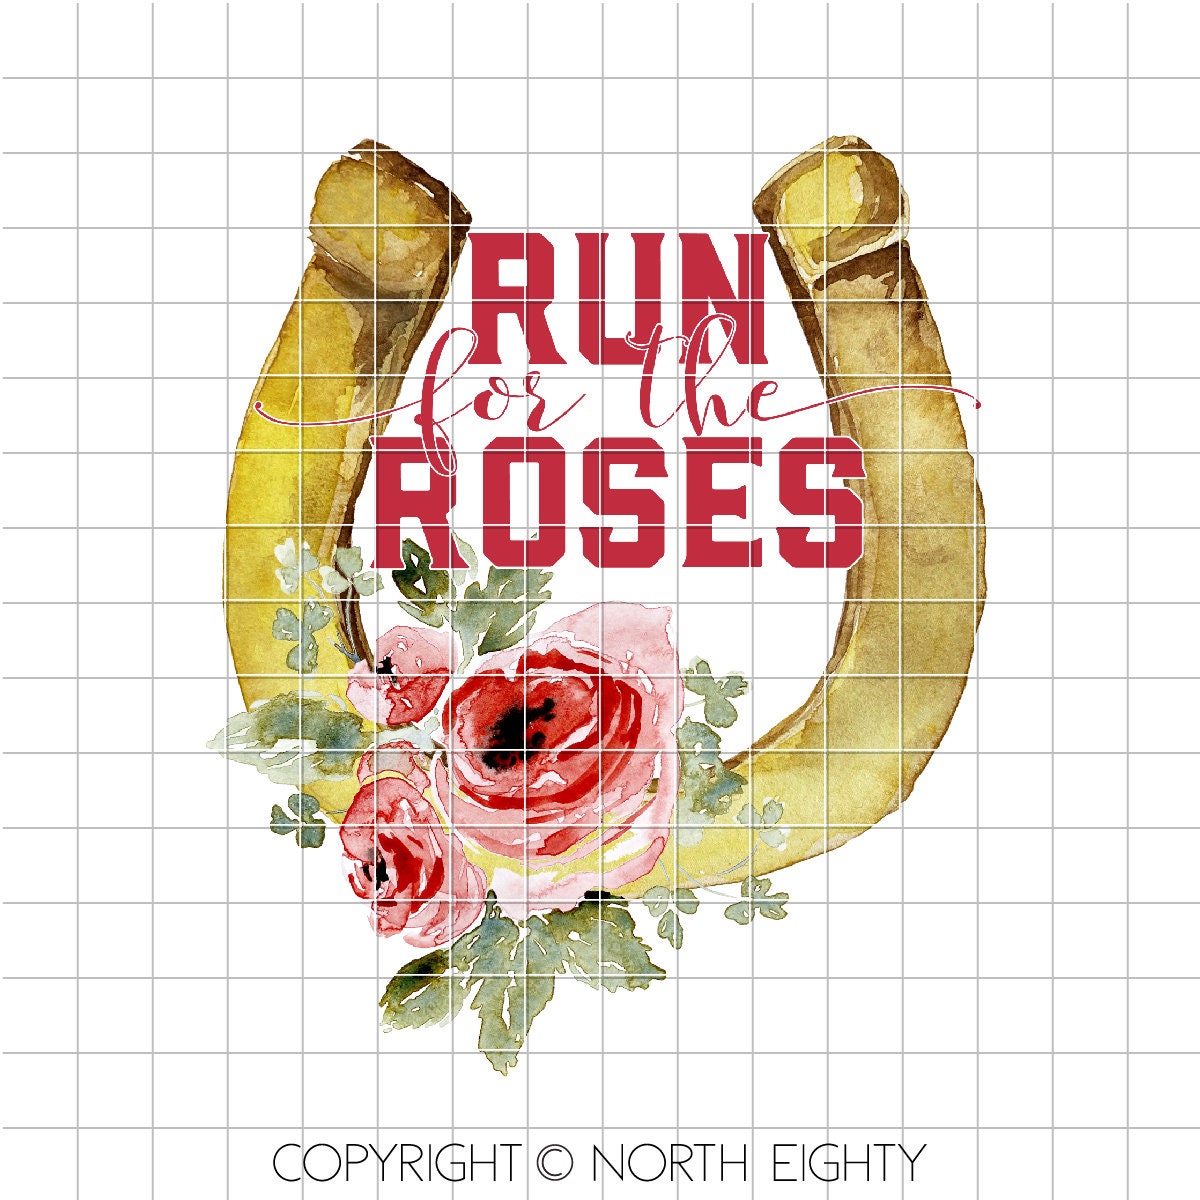 Derby png - Kentucky Derby - Roses - Watercolor floral - Sublimation - Waterslide - Derby Design - Horse Racing - Derby - Run For The Roses